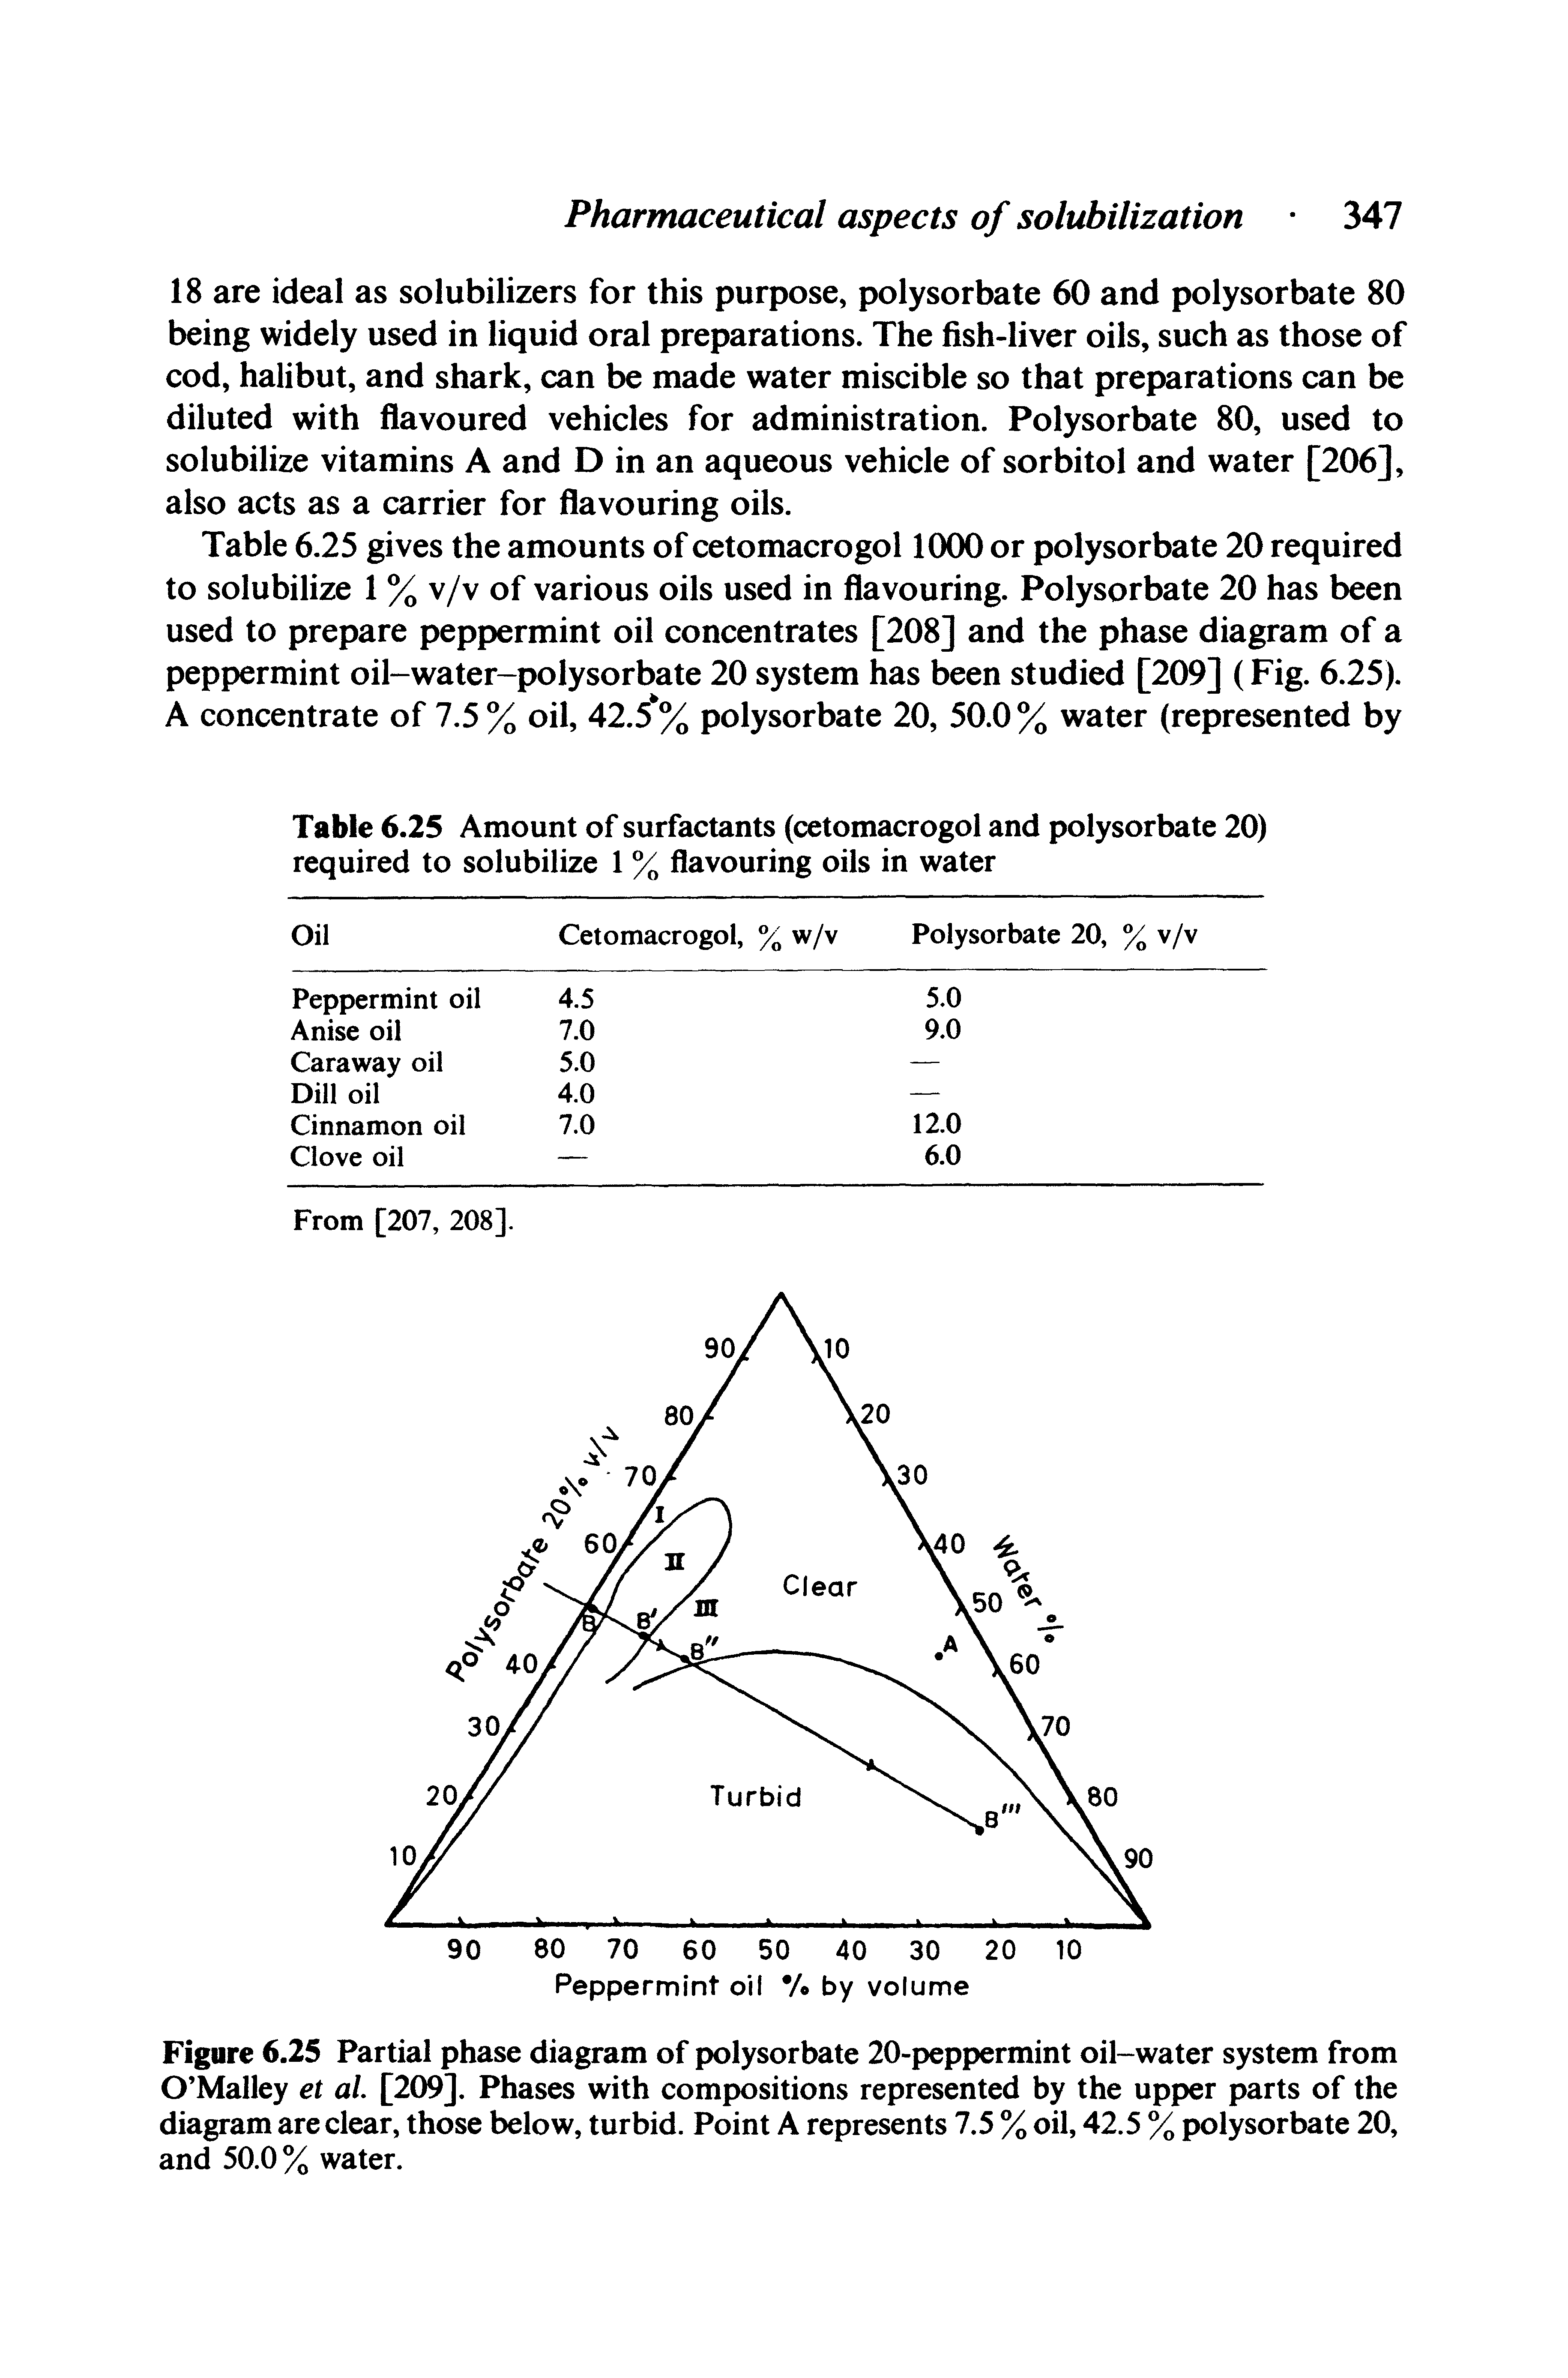 Figure 6.25 Partial phase diagram of polysorbate 20-peppermint oil-water system from O Malley et ai [209]. Phases with compositions represented by the upper parts of the diagram are clear, those below, turbid. Point A represents 7.5 % oil, 42.5 % polysorbate 20, and 50.0% water.